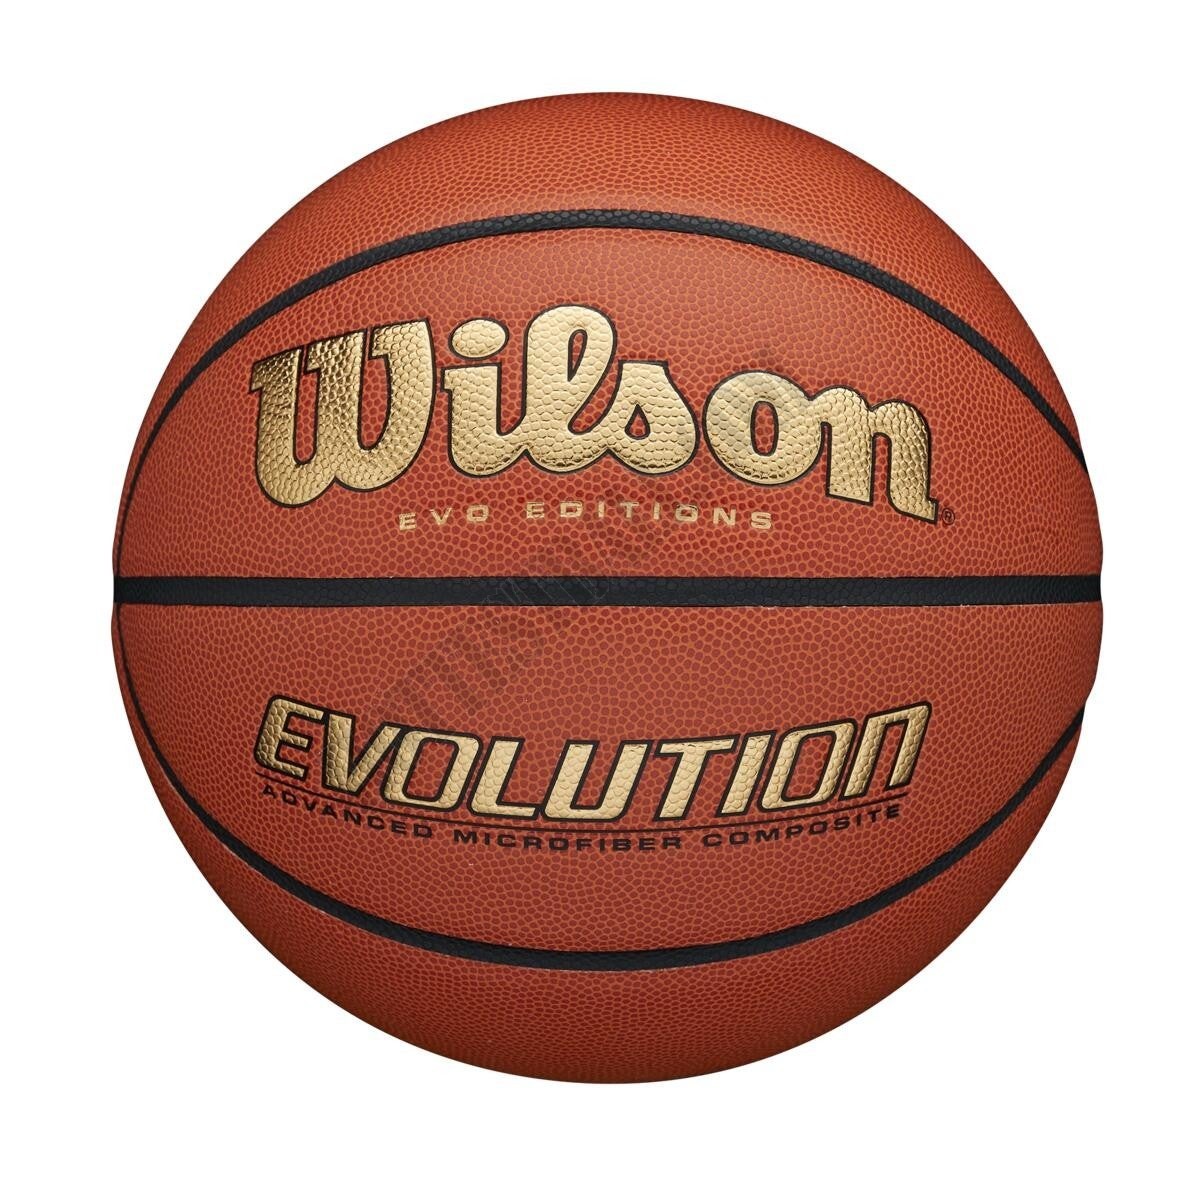 Evo Editions Gold Basketball - Wilson Discount Store - Evo Editions Gold Basketball - Wilson Discount Store